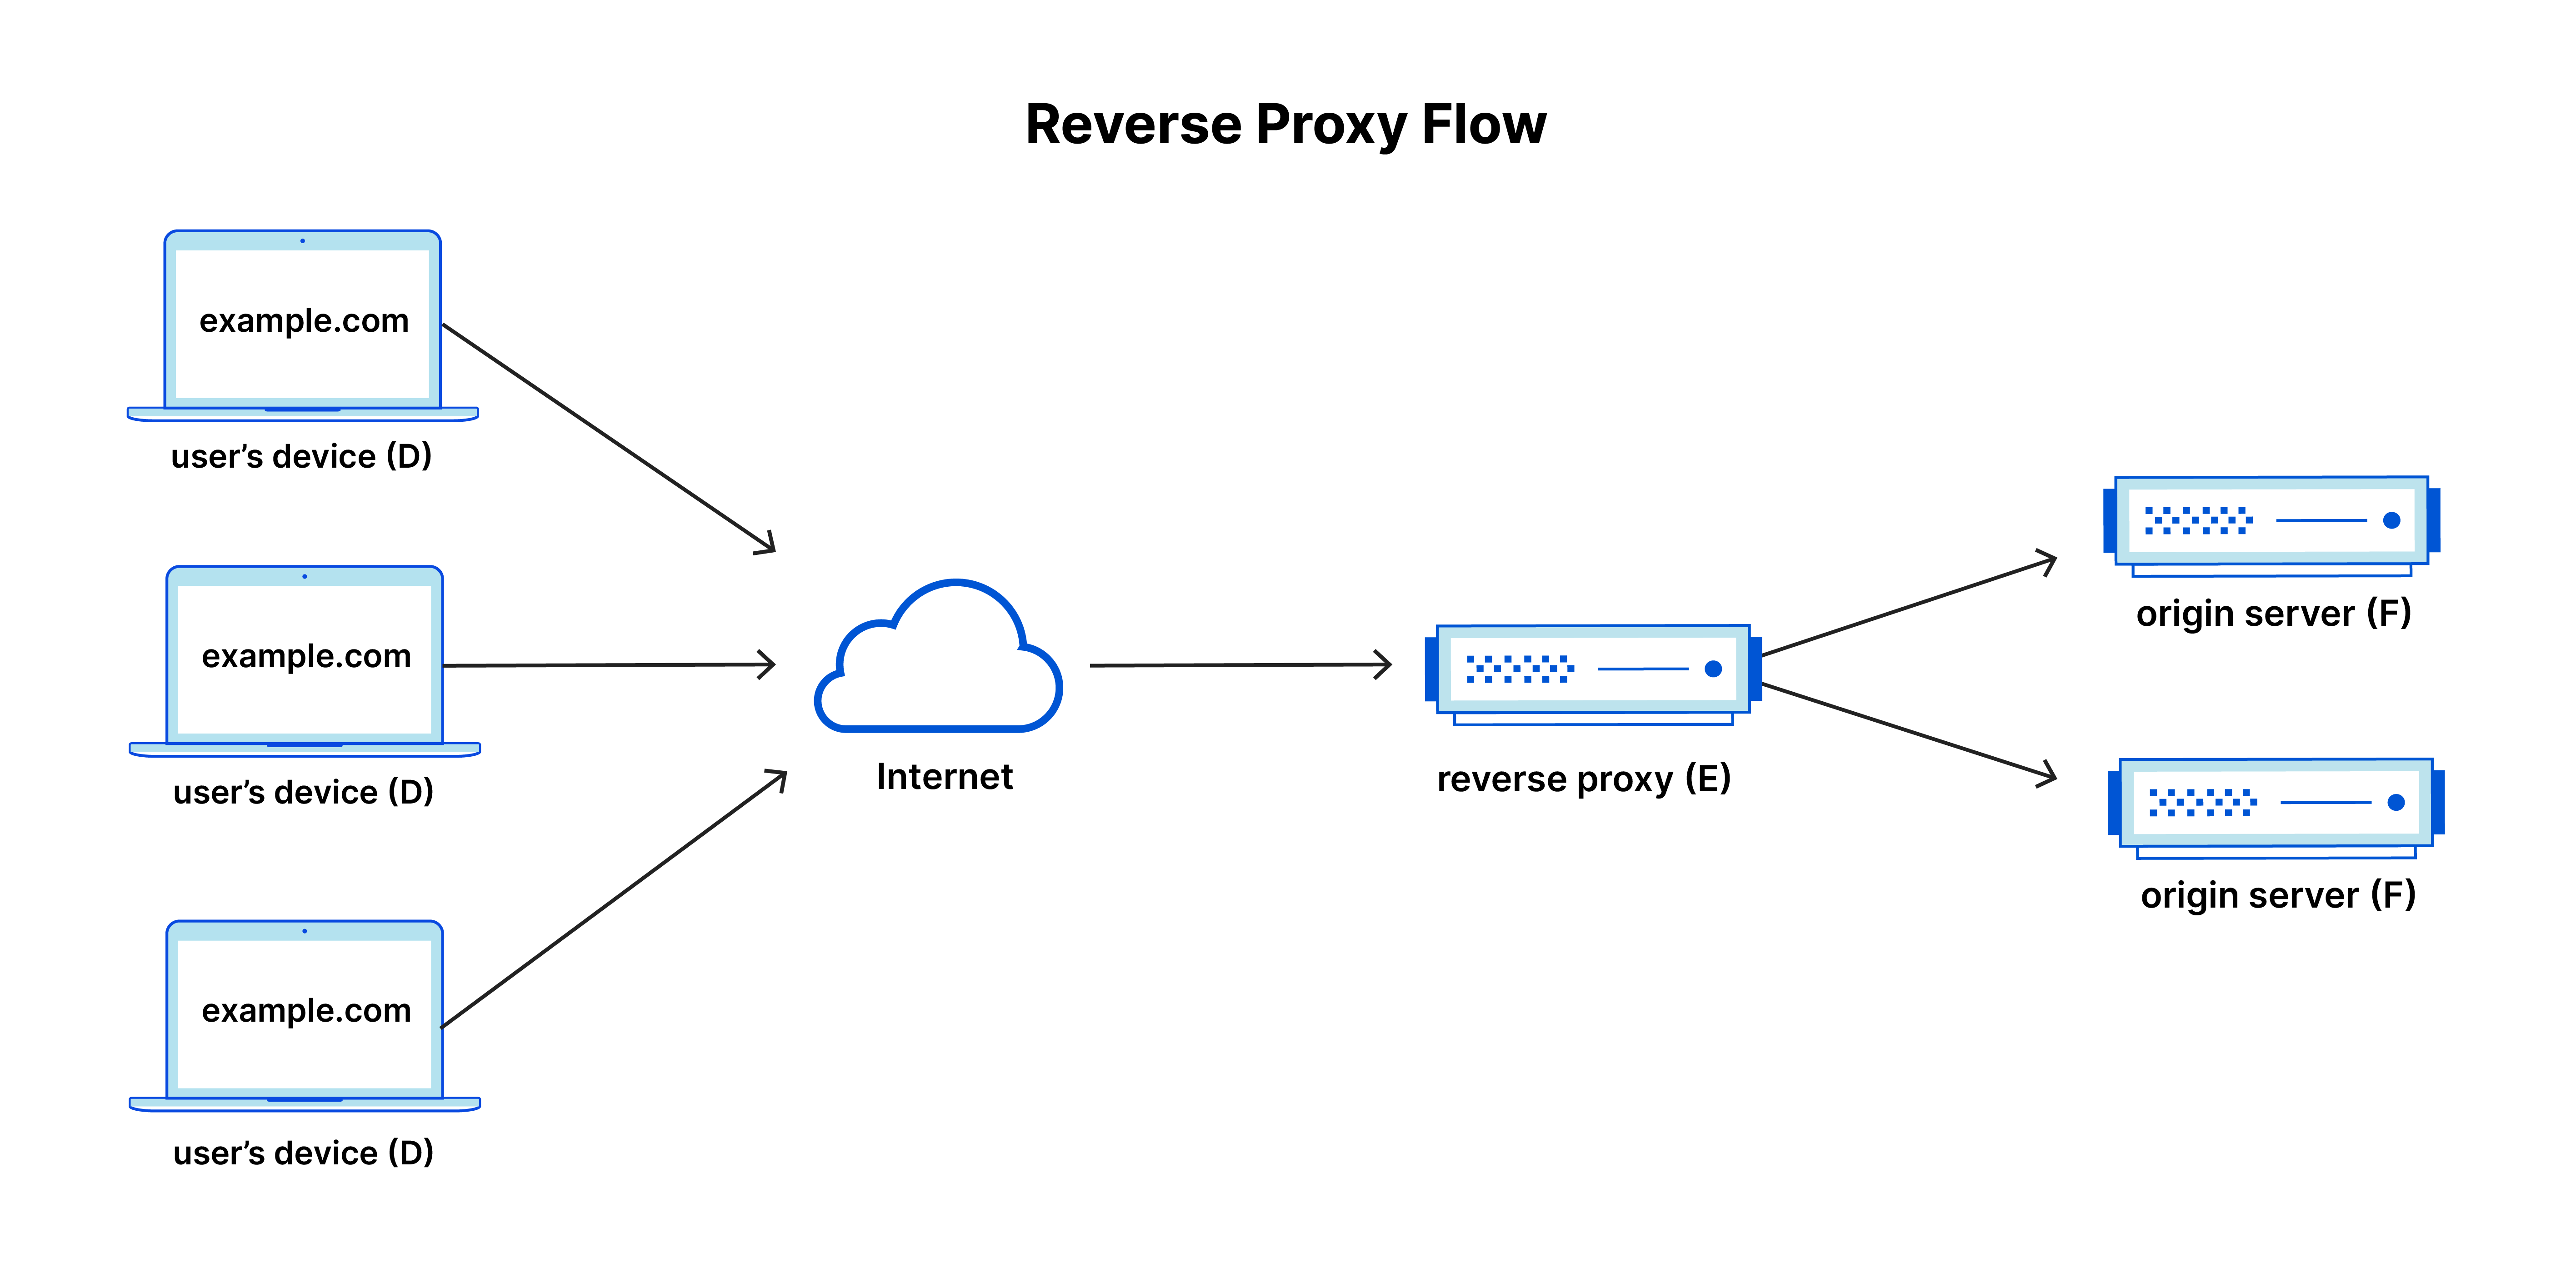 A digram showing the flow of client/server relationship and function of a reverse proxy